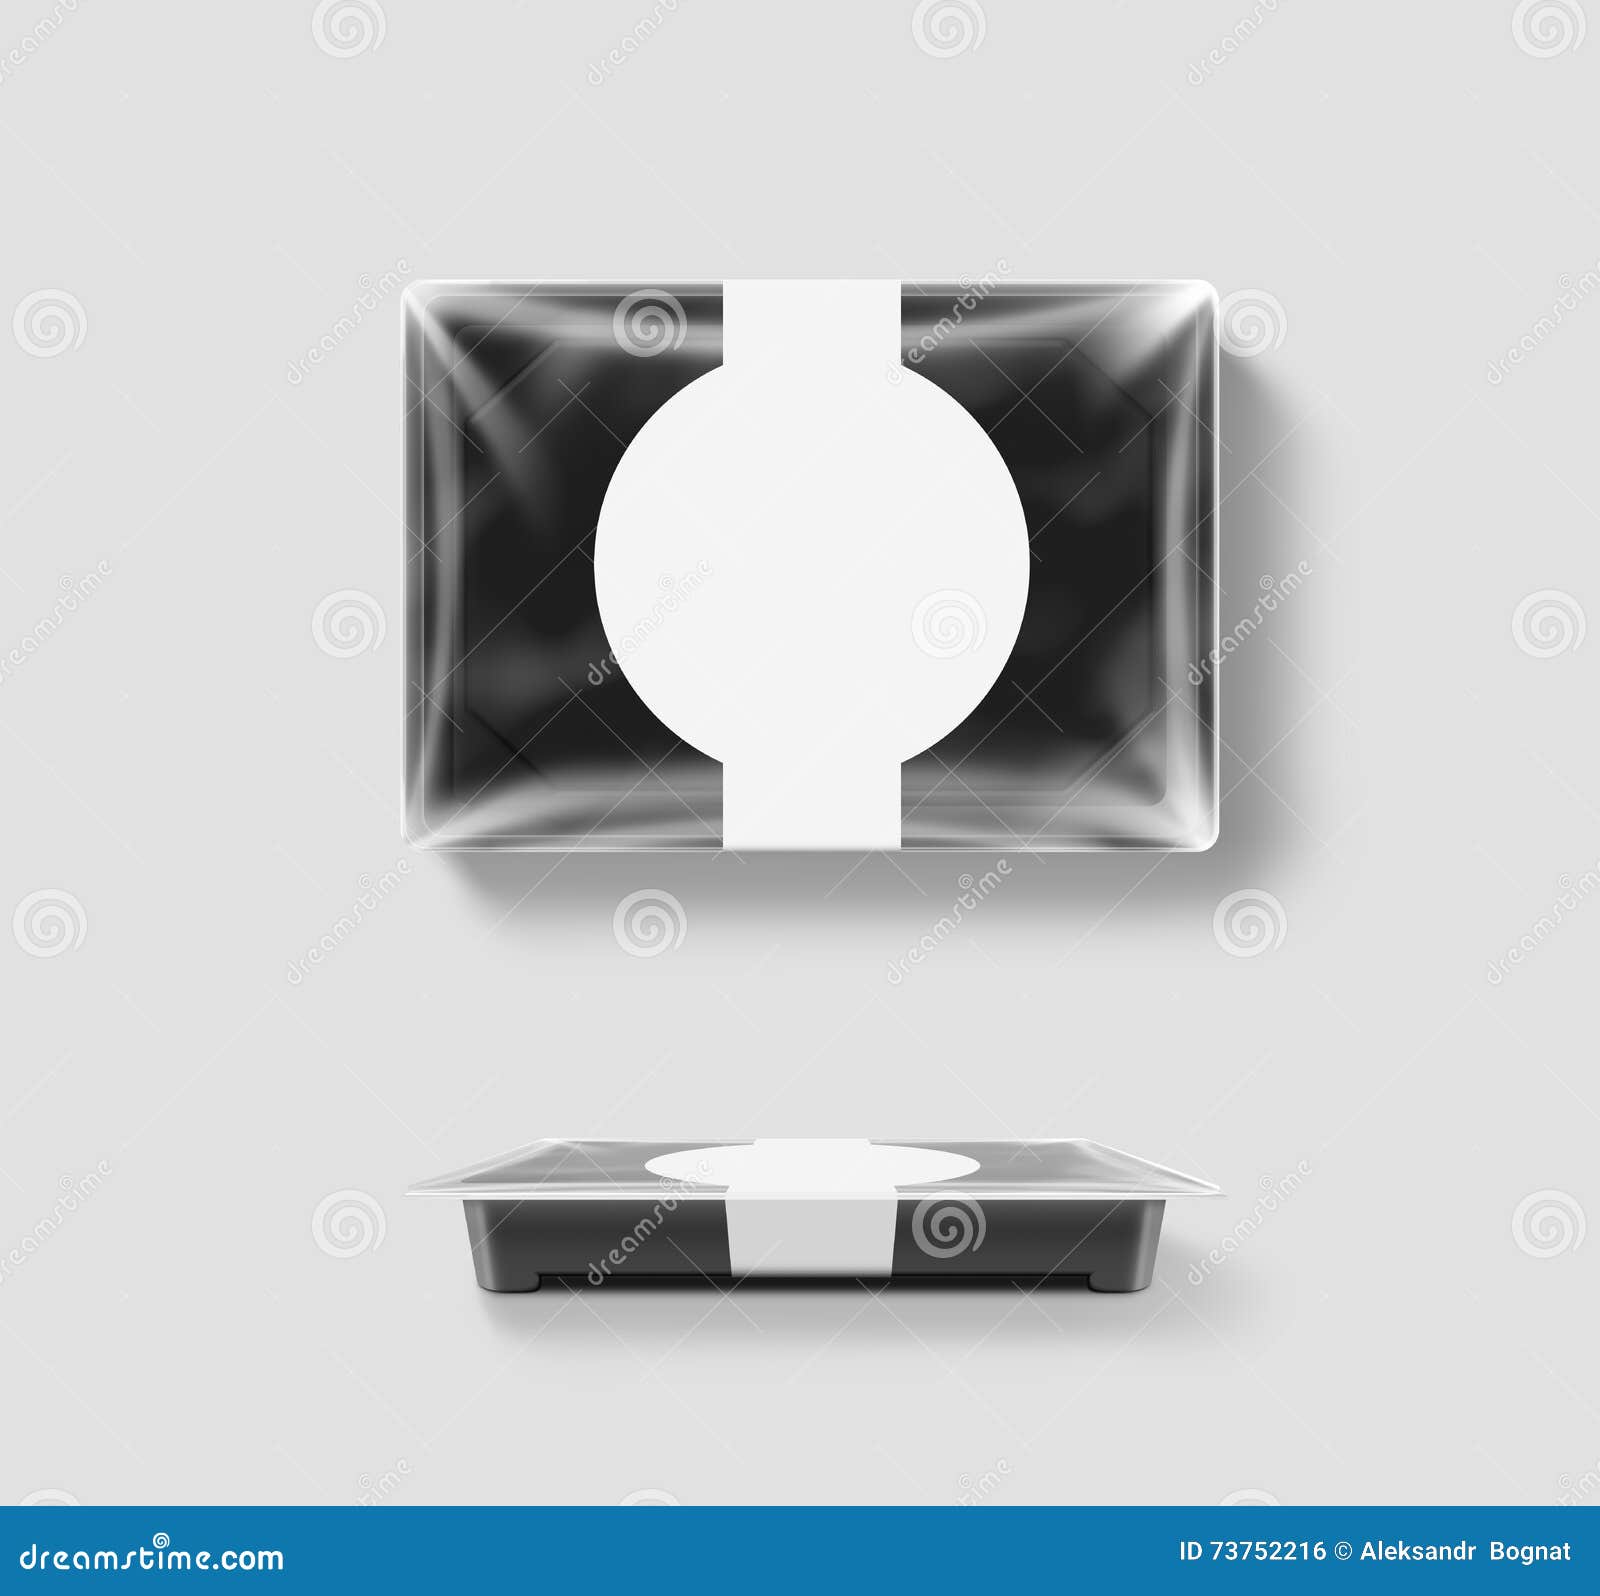 Download Blank Plastic Disposable Food Container Mockup ...